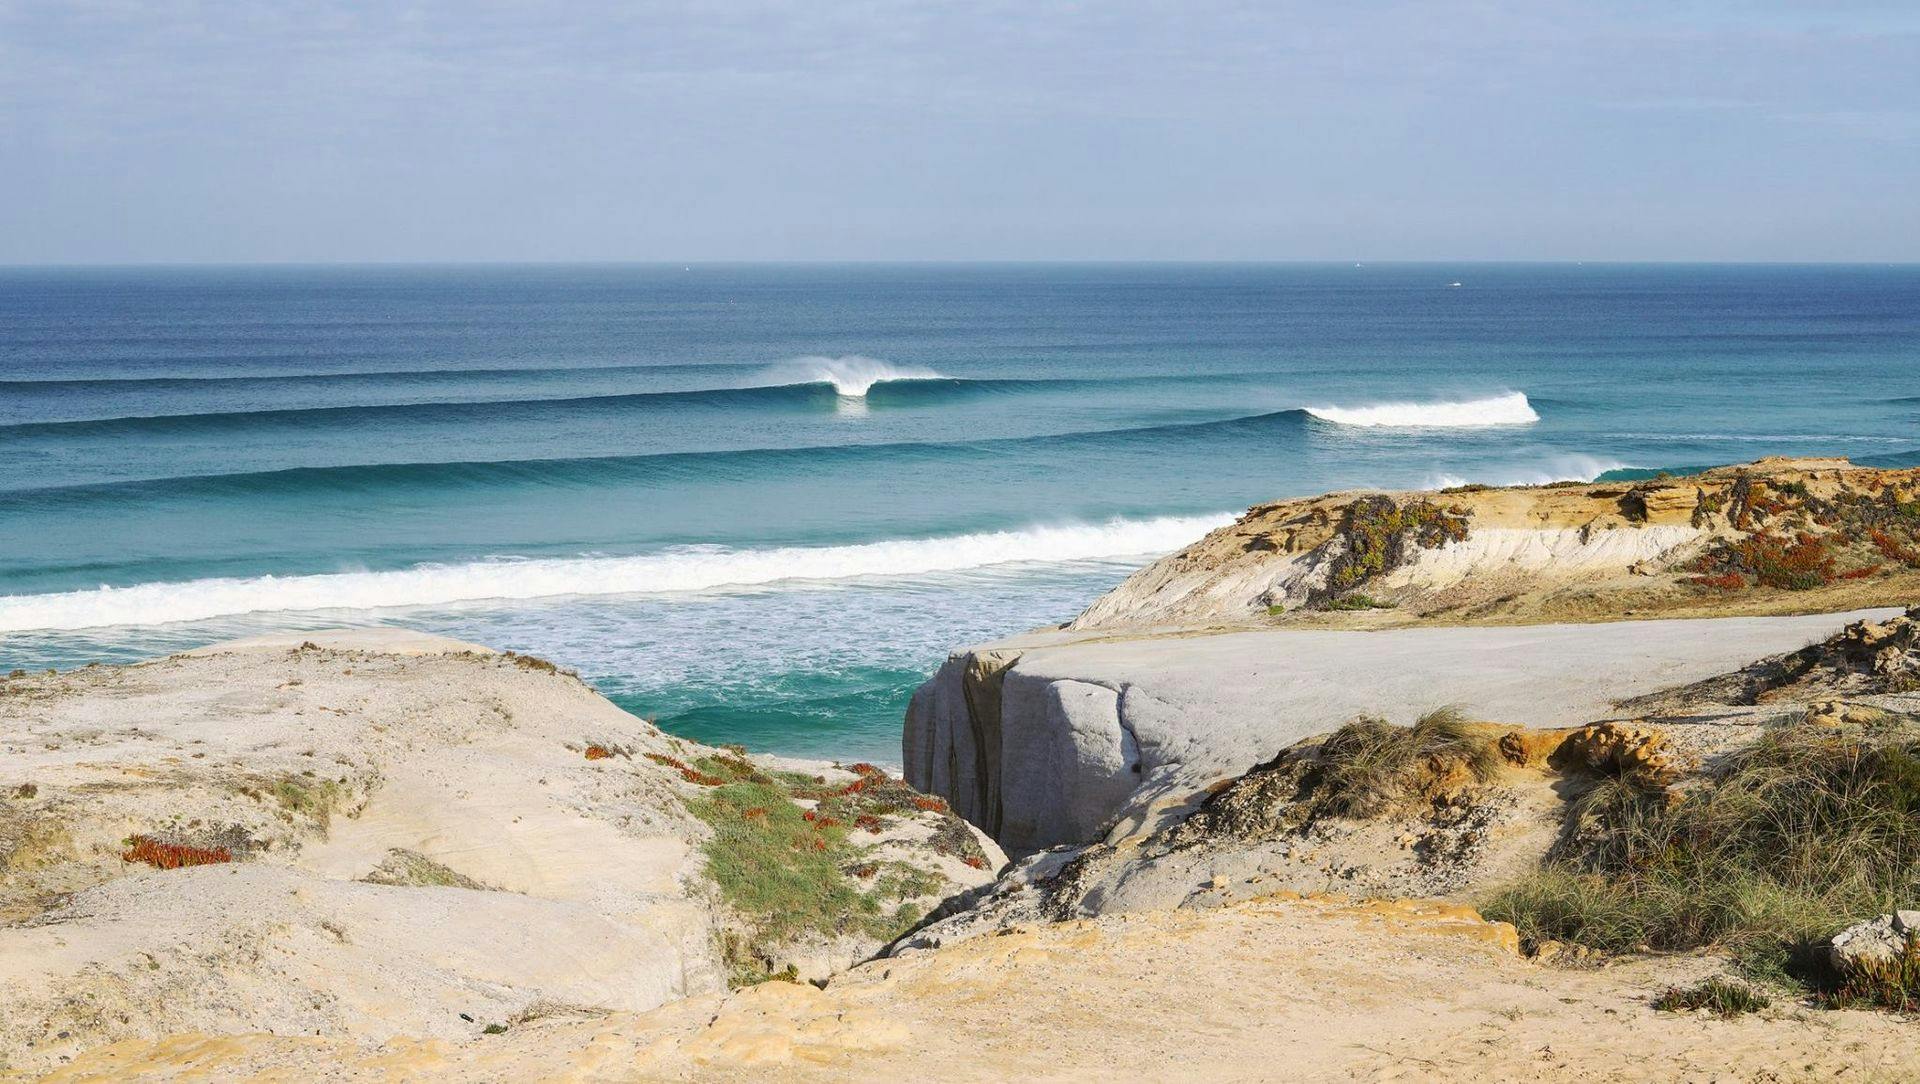 Coworking, Coliving and Surfing in Peniche (Portugal)